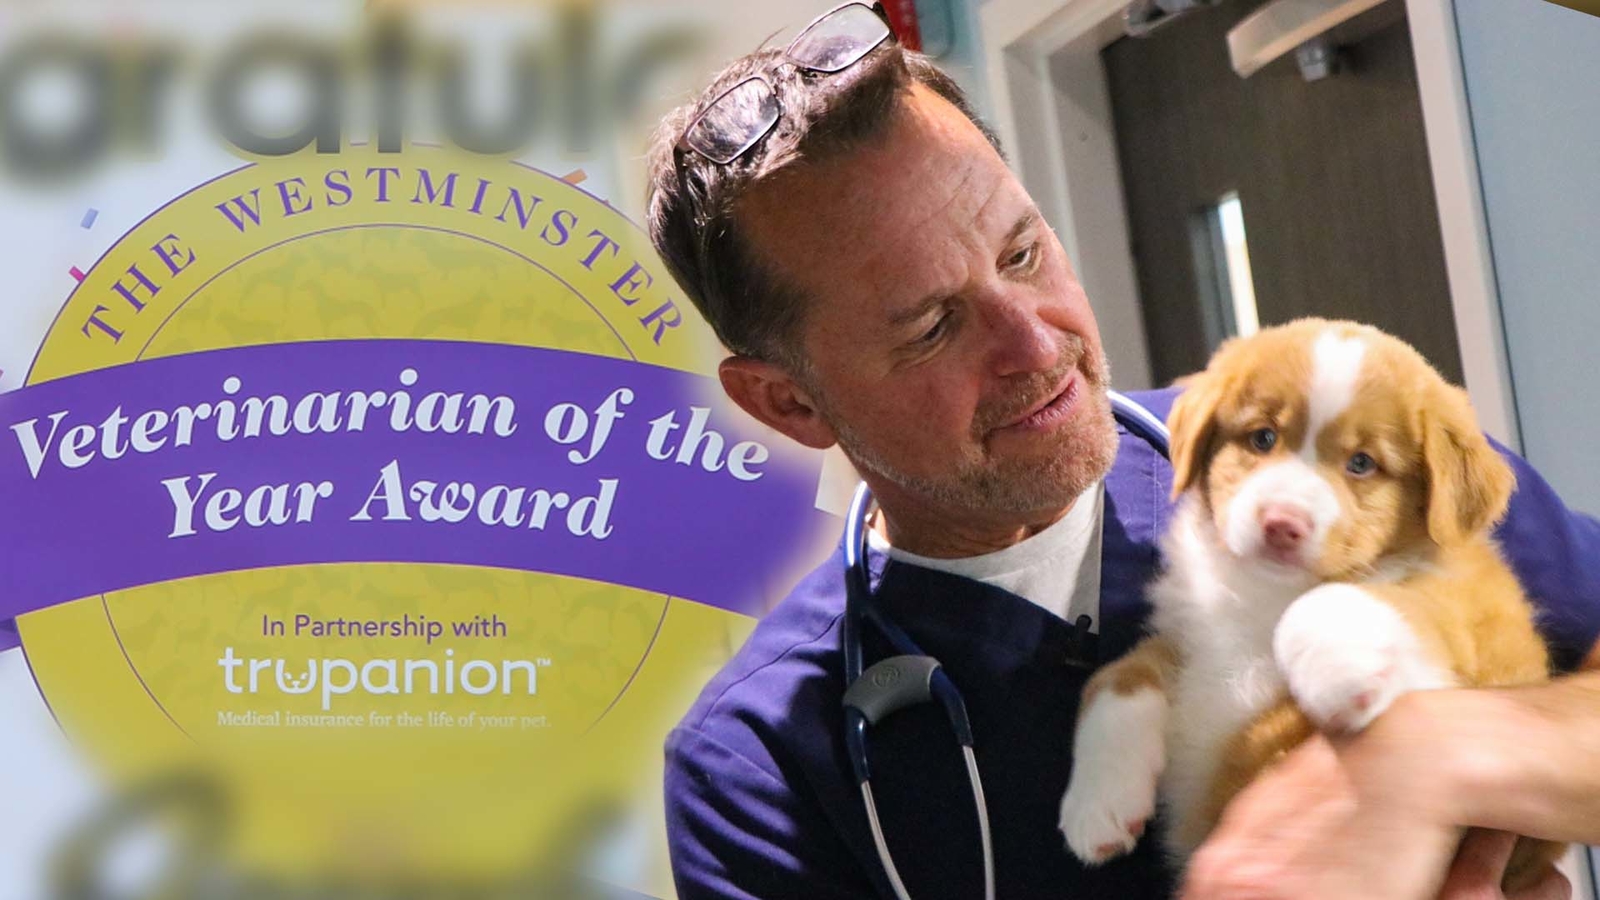  Pa. doctor earns nationwide 'Veterinarian of the Year Award' 